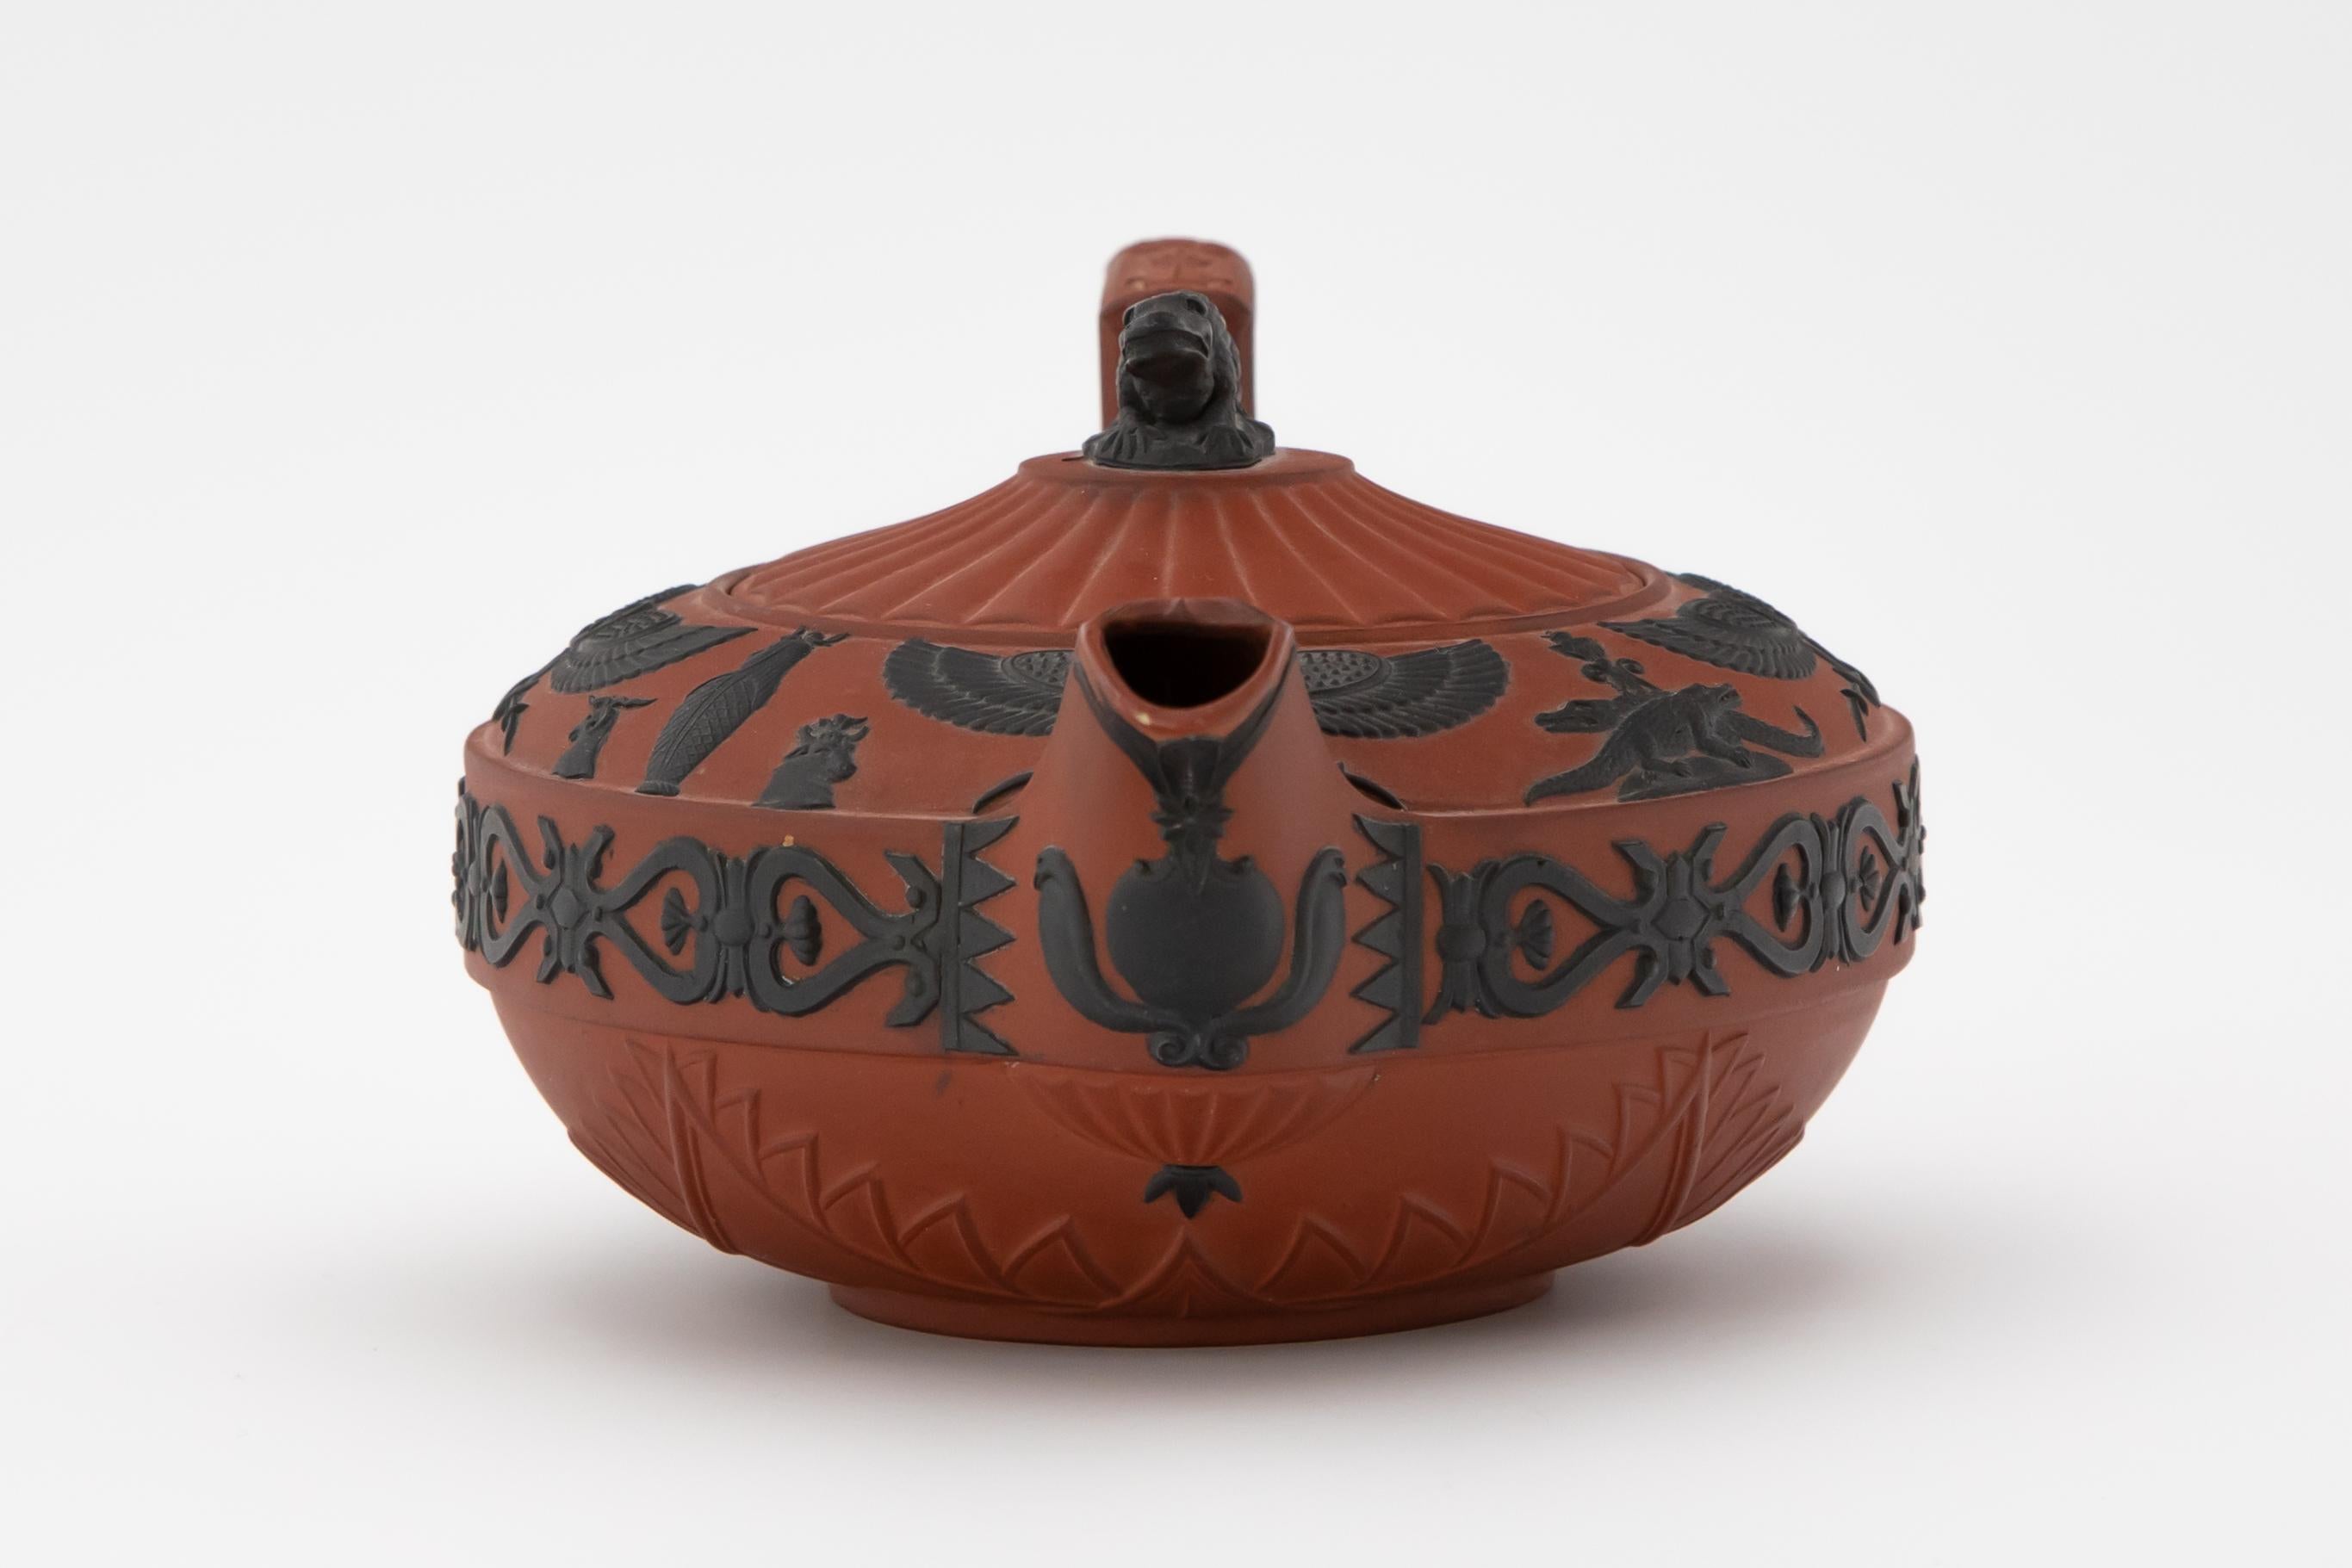 A rosso antico teapot made by Wedgwood ca. 1810. The pot's red body is accentuated by black basalt details in the Egyptian Revival style.

This rosso antico teapot is a fine example of the Egyptian Revival style, popularized in Europe during